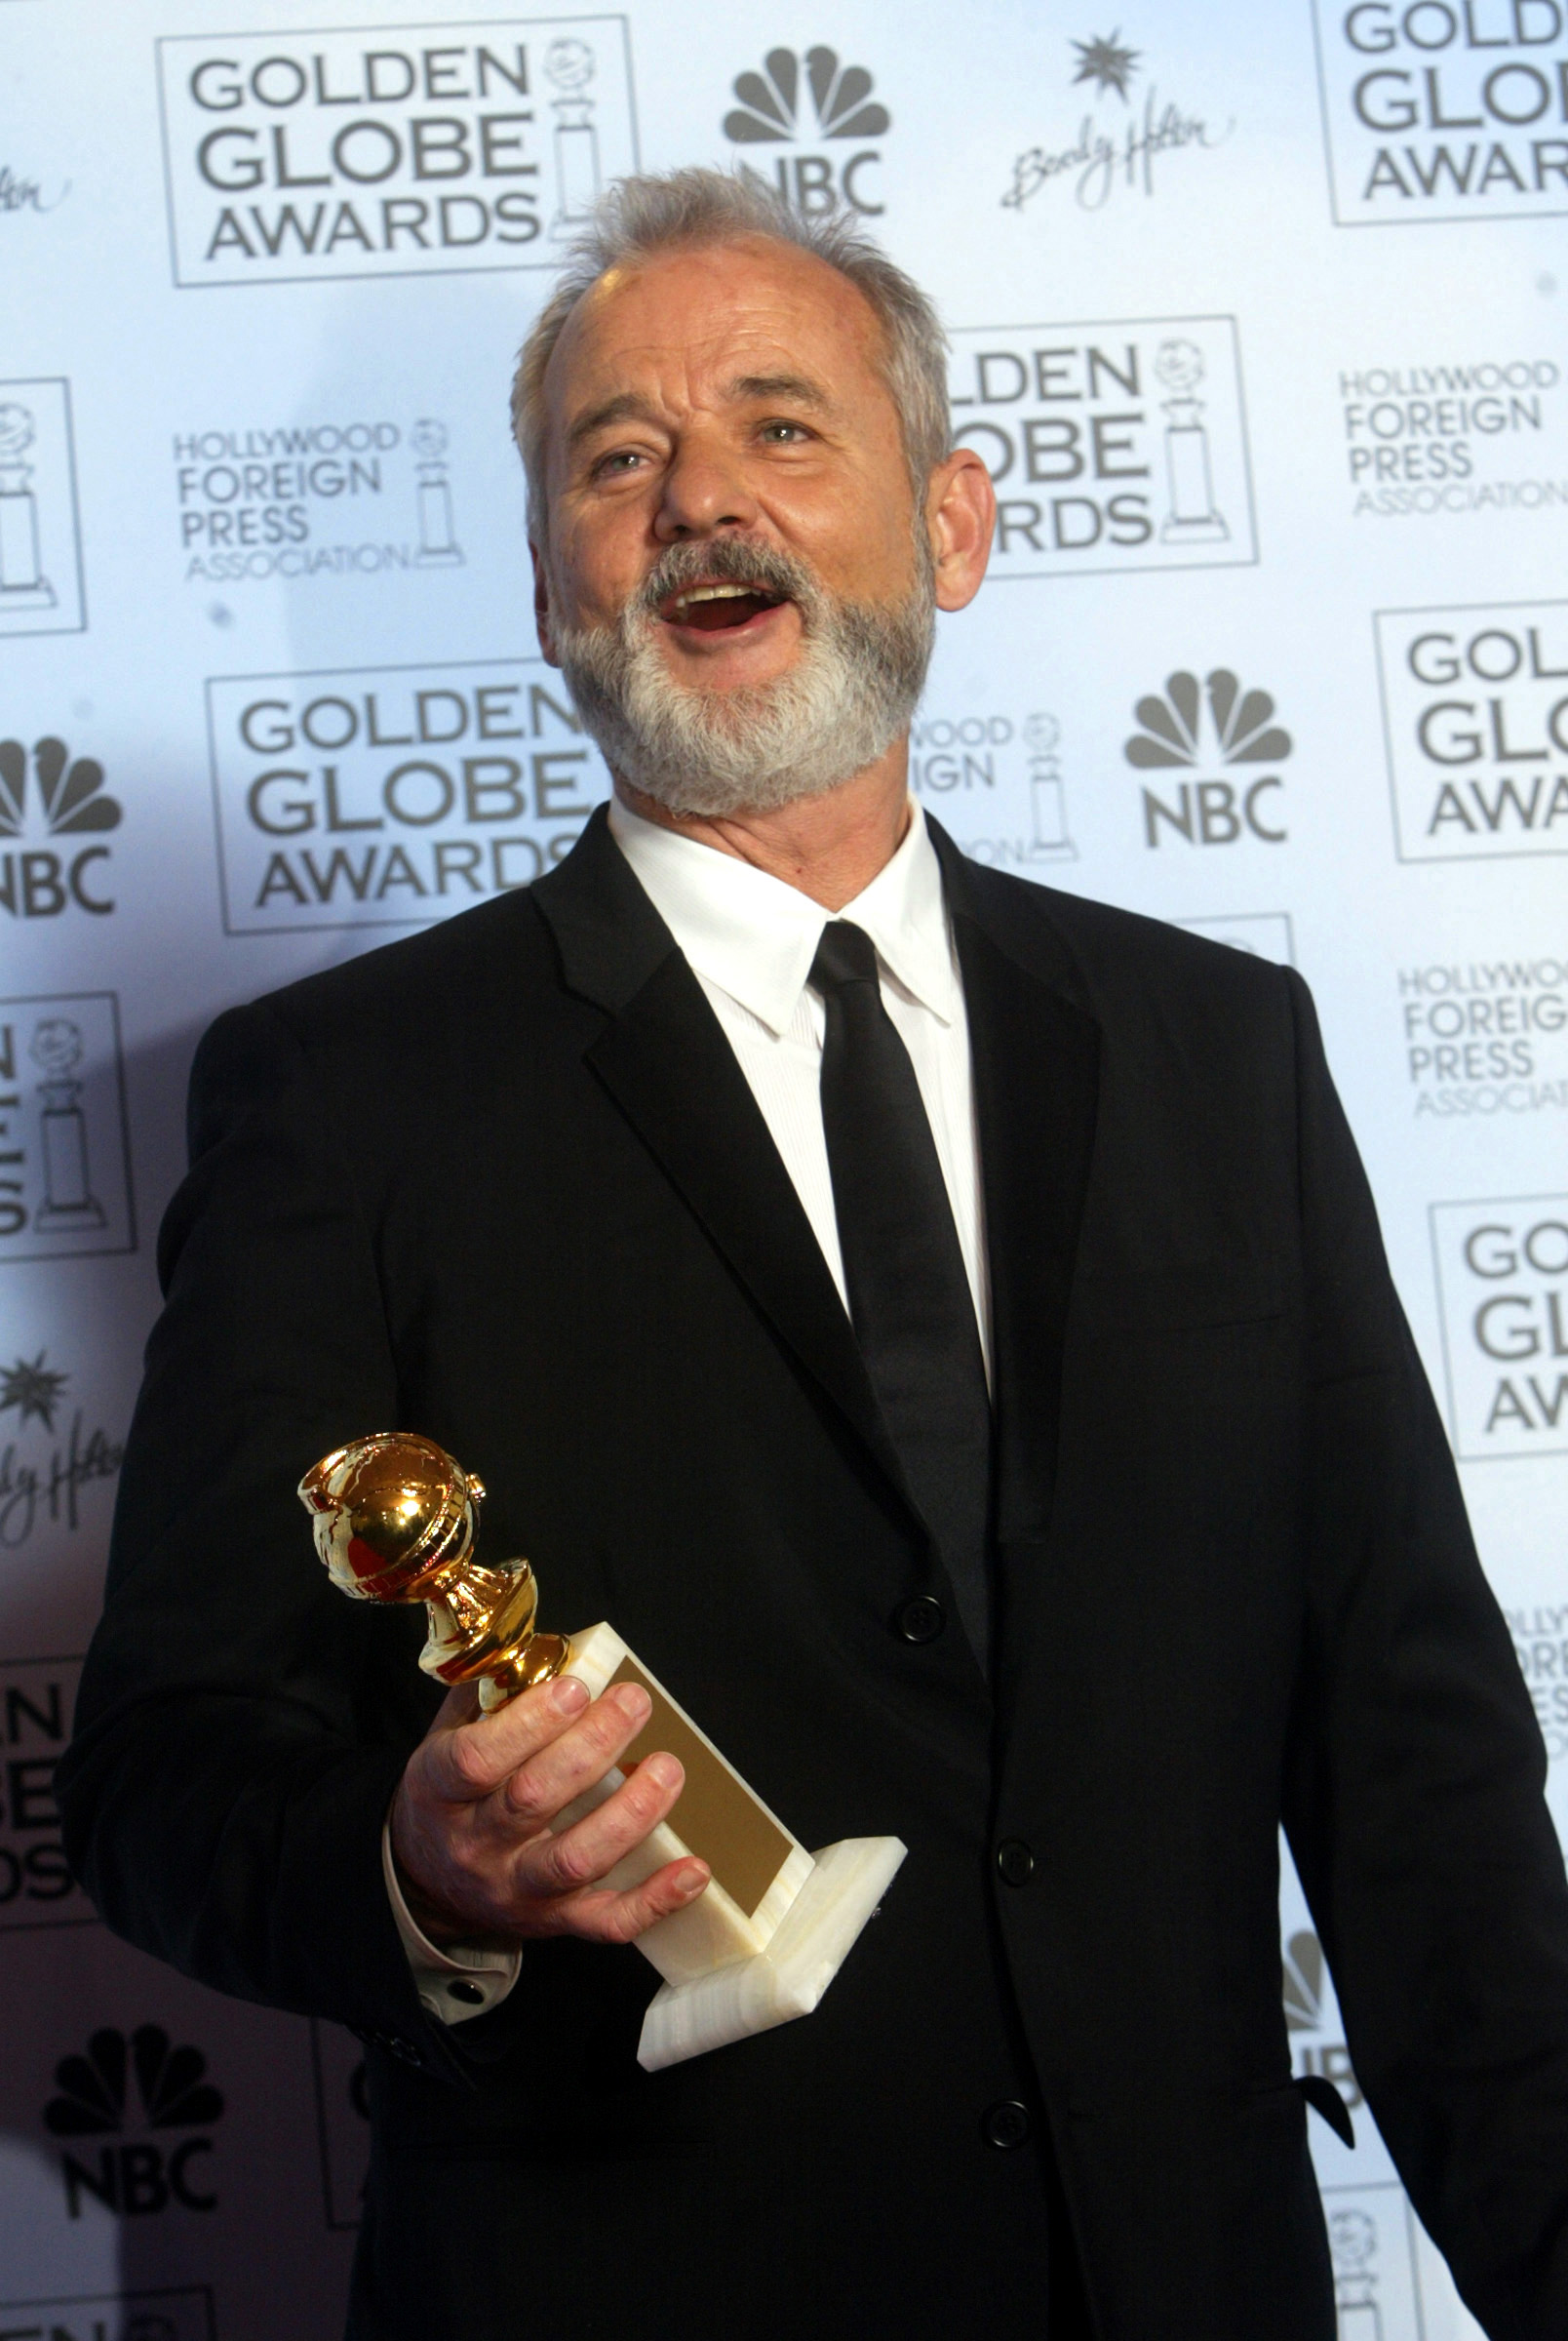 Bill Murray at the 61st Annual Golden Globe Awards on November 24, 2000, in Beverly Hills, California. | Source: Getty Images